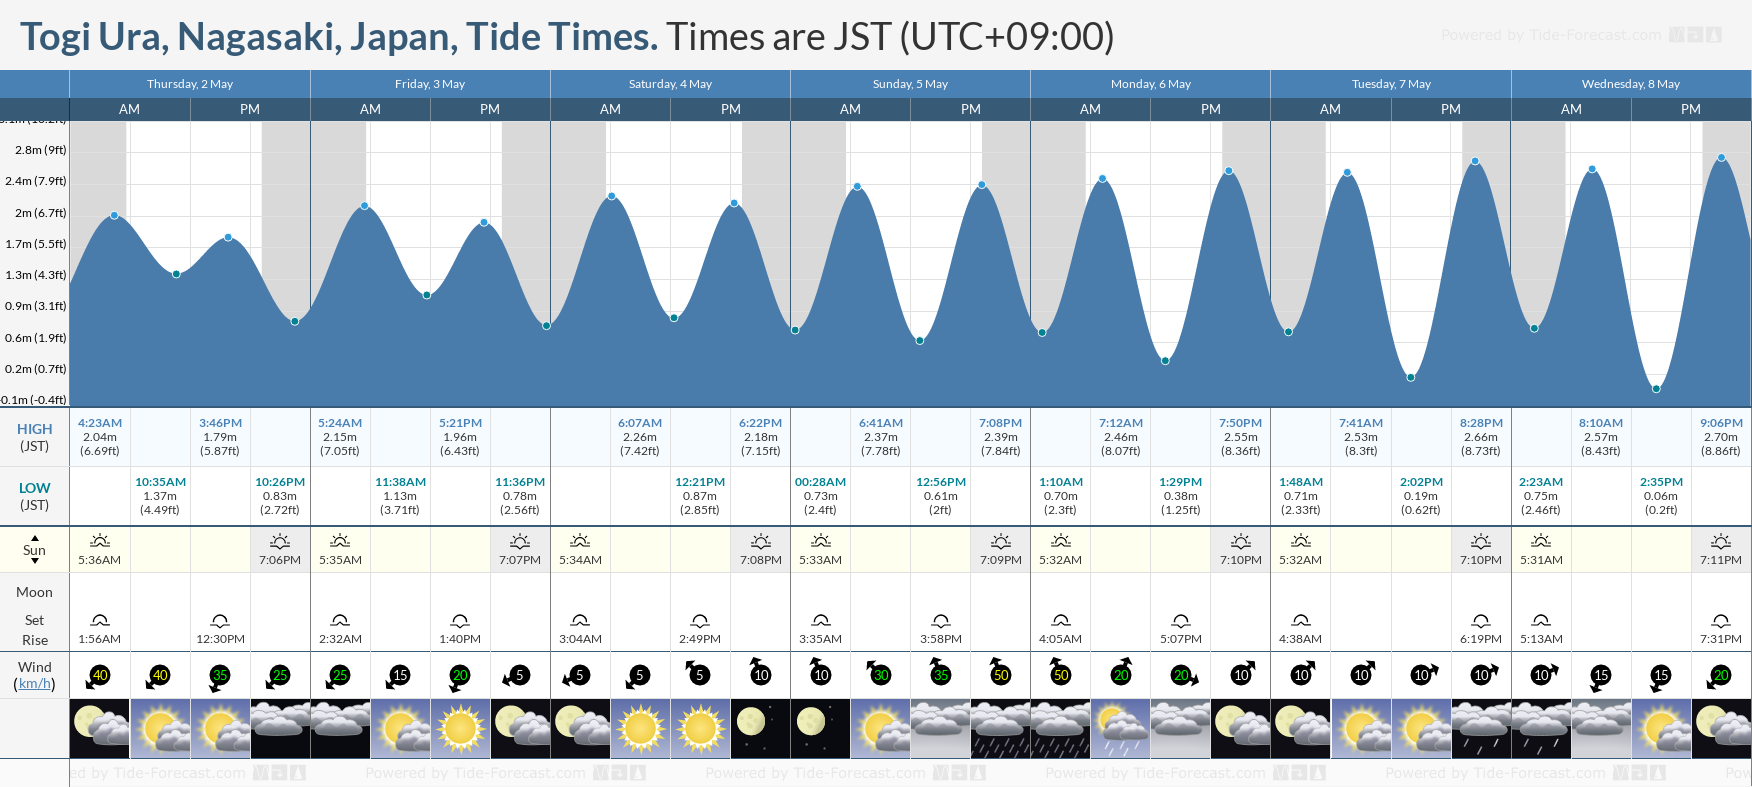 Togi Ura, Nagasaki, Japan Tide Chart including high and low tide tide times for the next 7 days